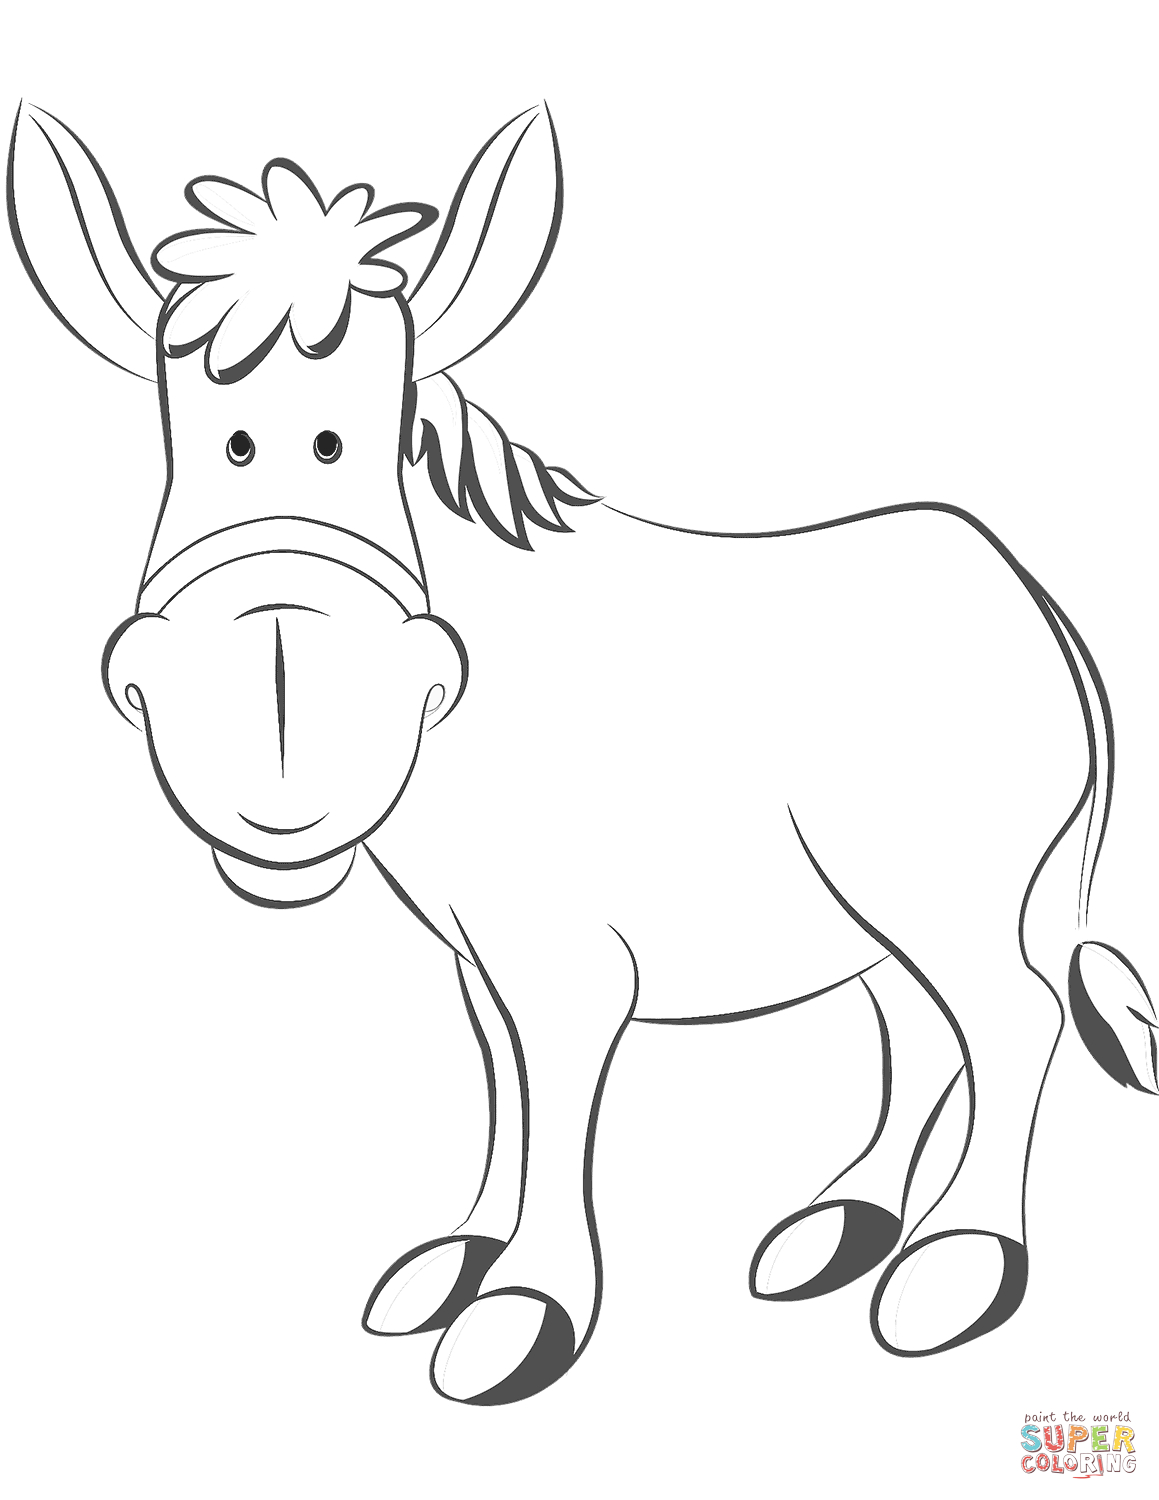 Donkey Coloring Page Cartoon Donkey Coloring Page Free Printable Coloring Pages